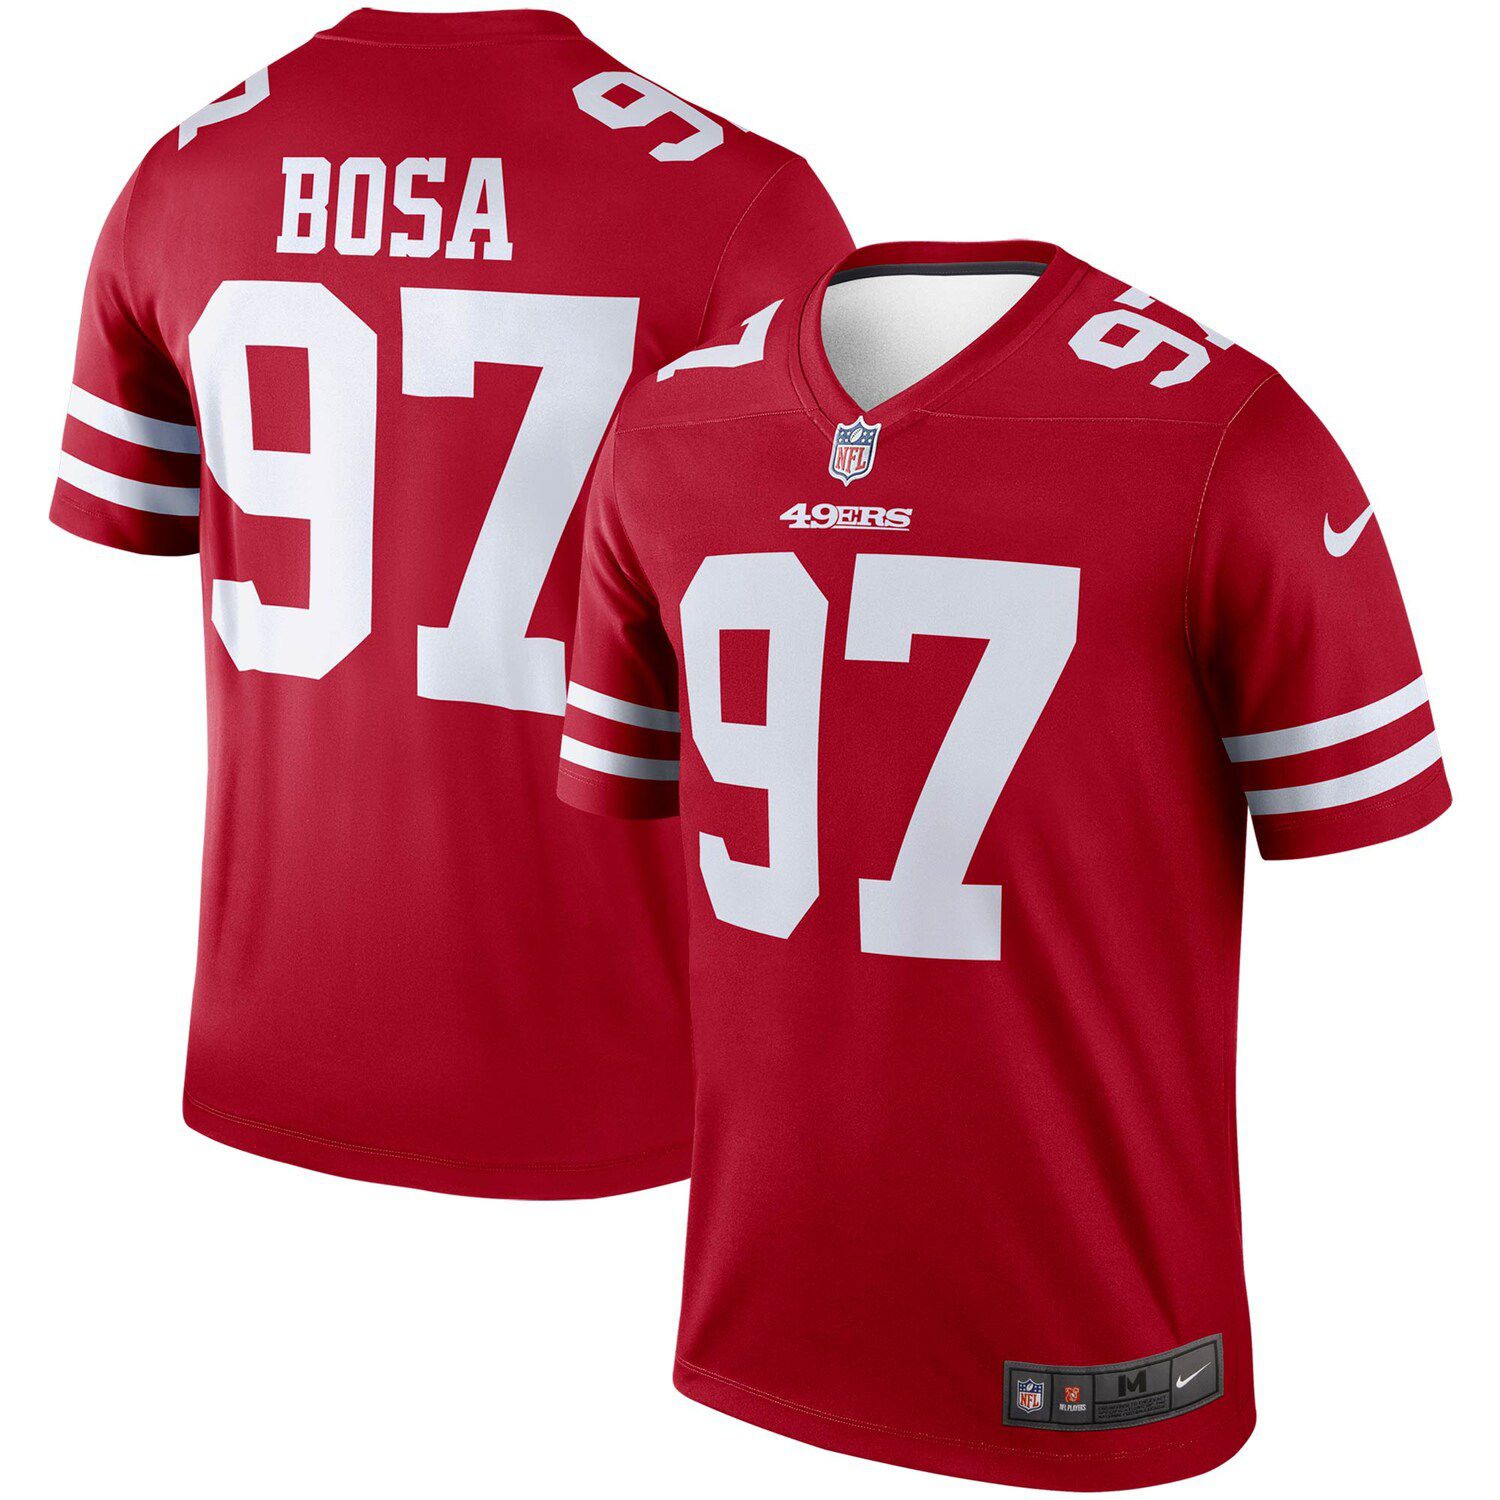 49ers gear for sale